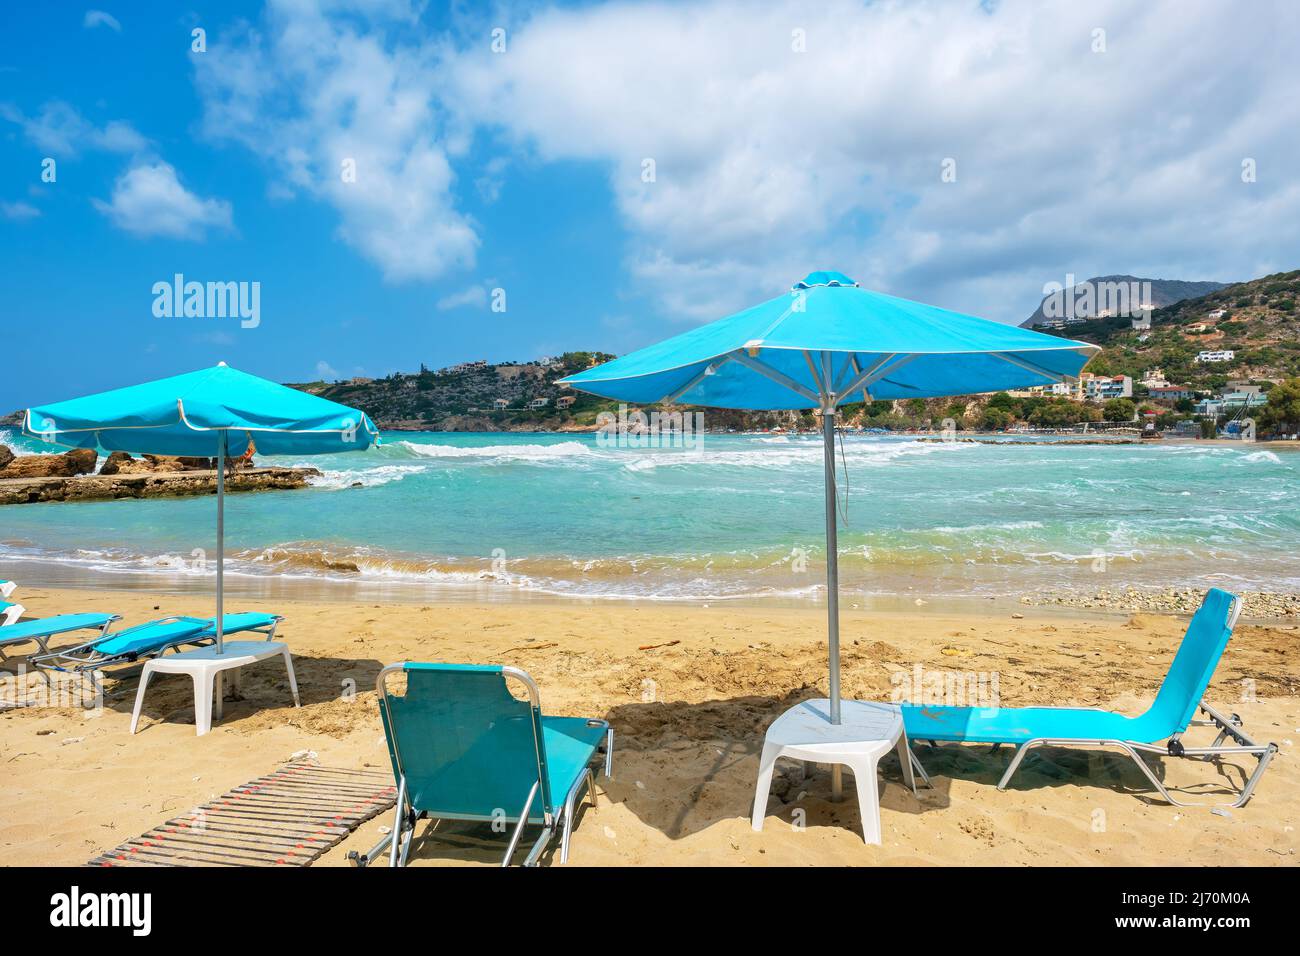 Sun loungers and parasols on empty beach at windy day. Almyrida. Crete, Greece Stock Photo